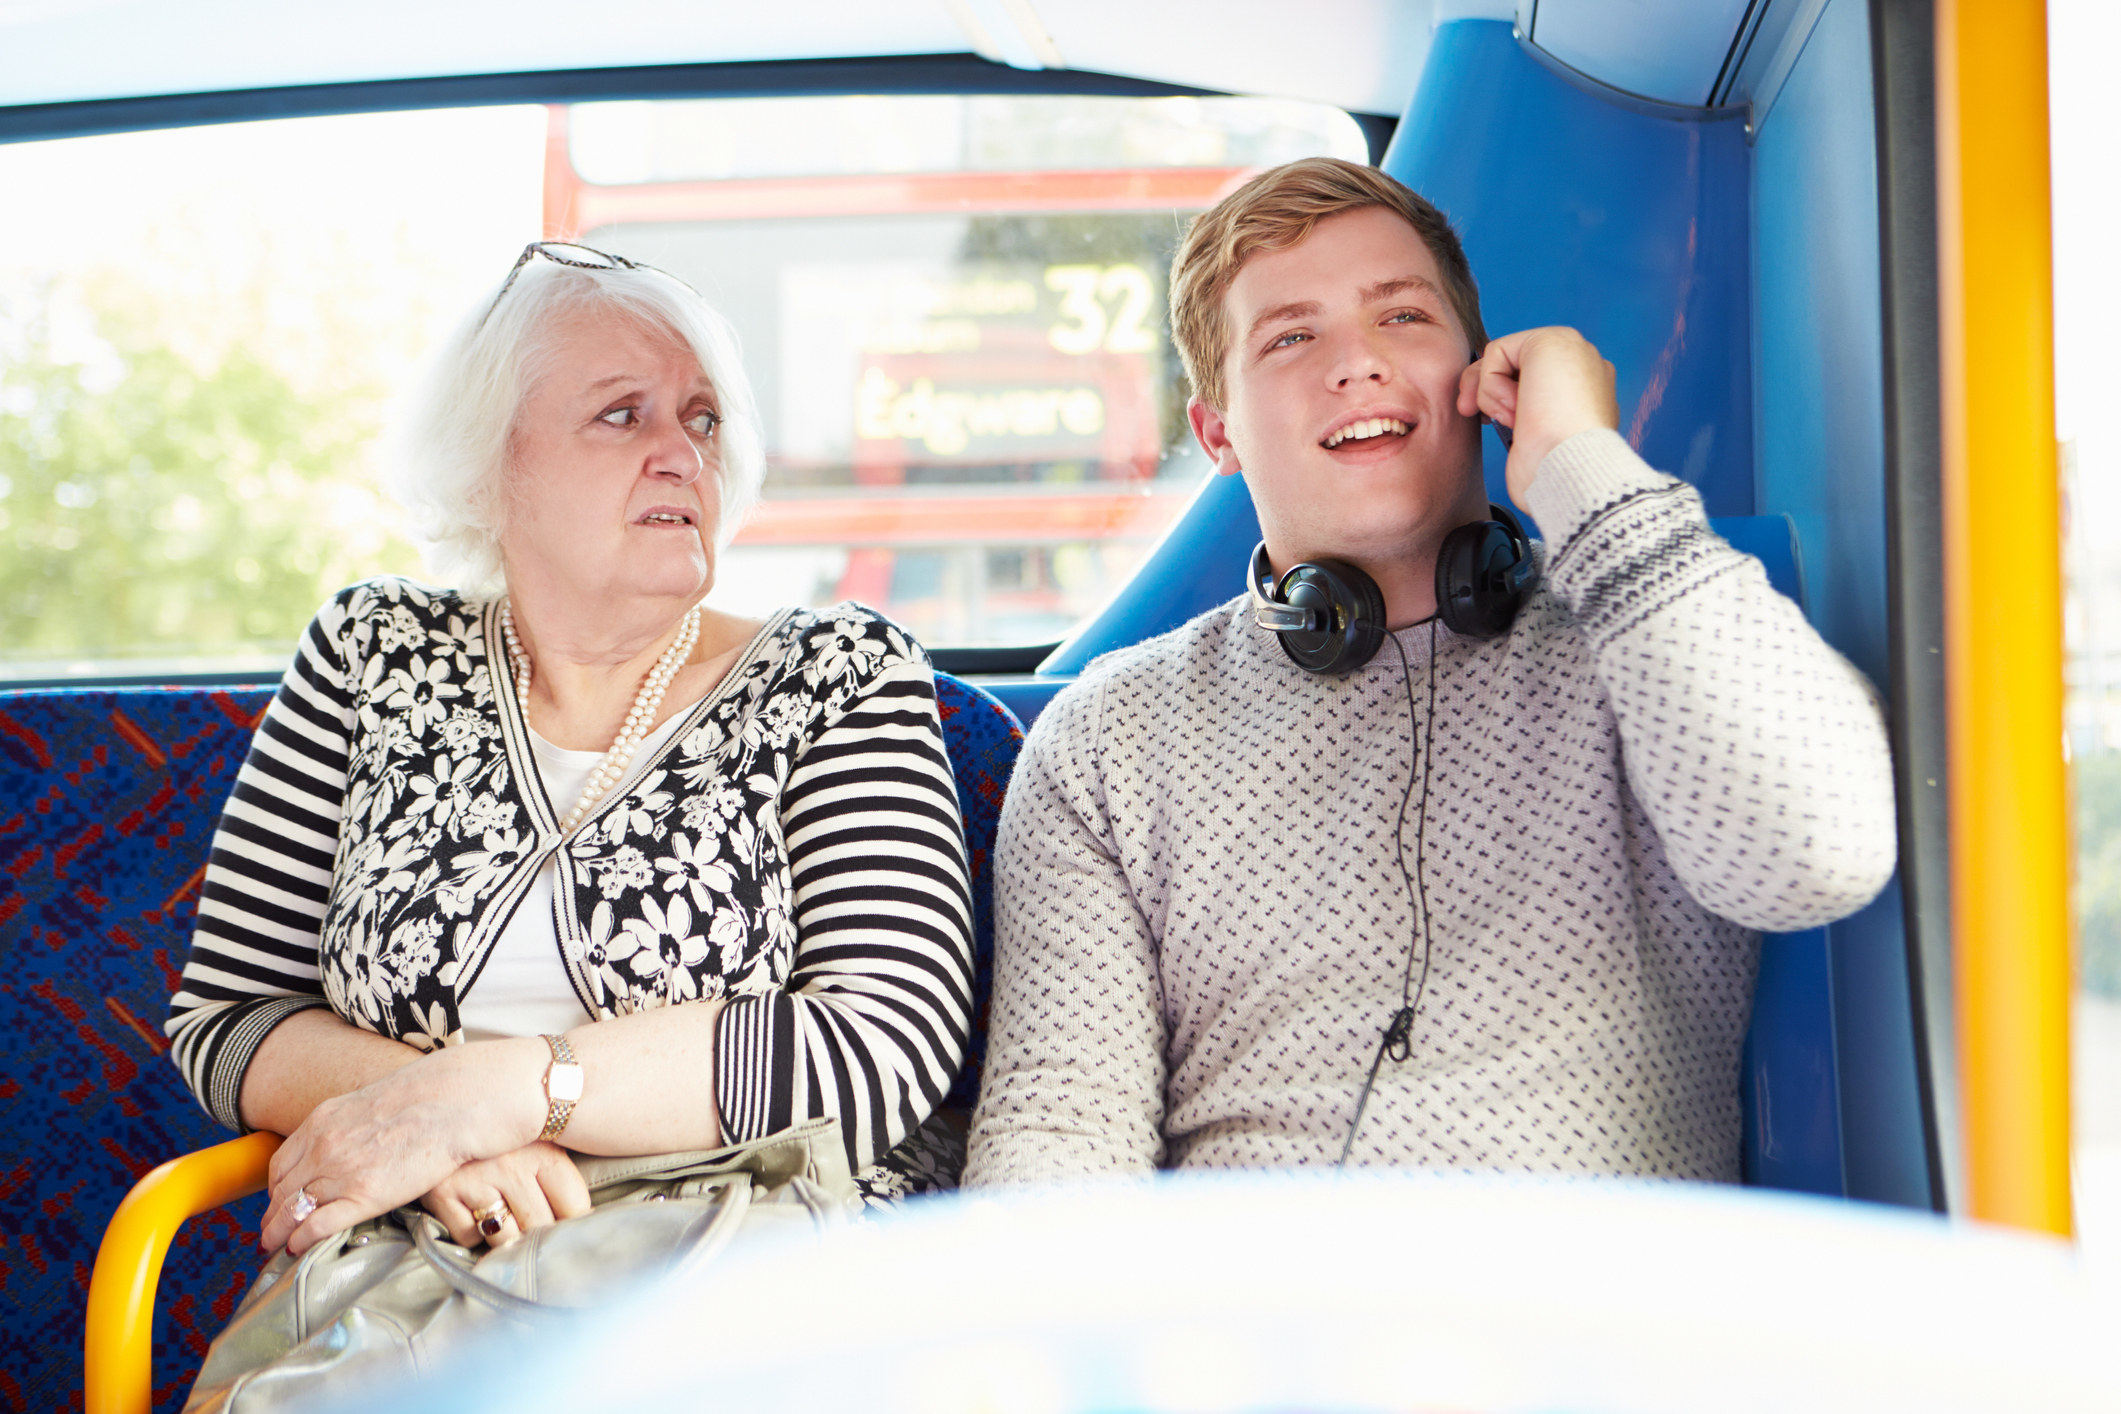 A woman looking in disgust at a young man wearing headphones on the bus